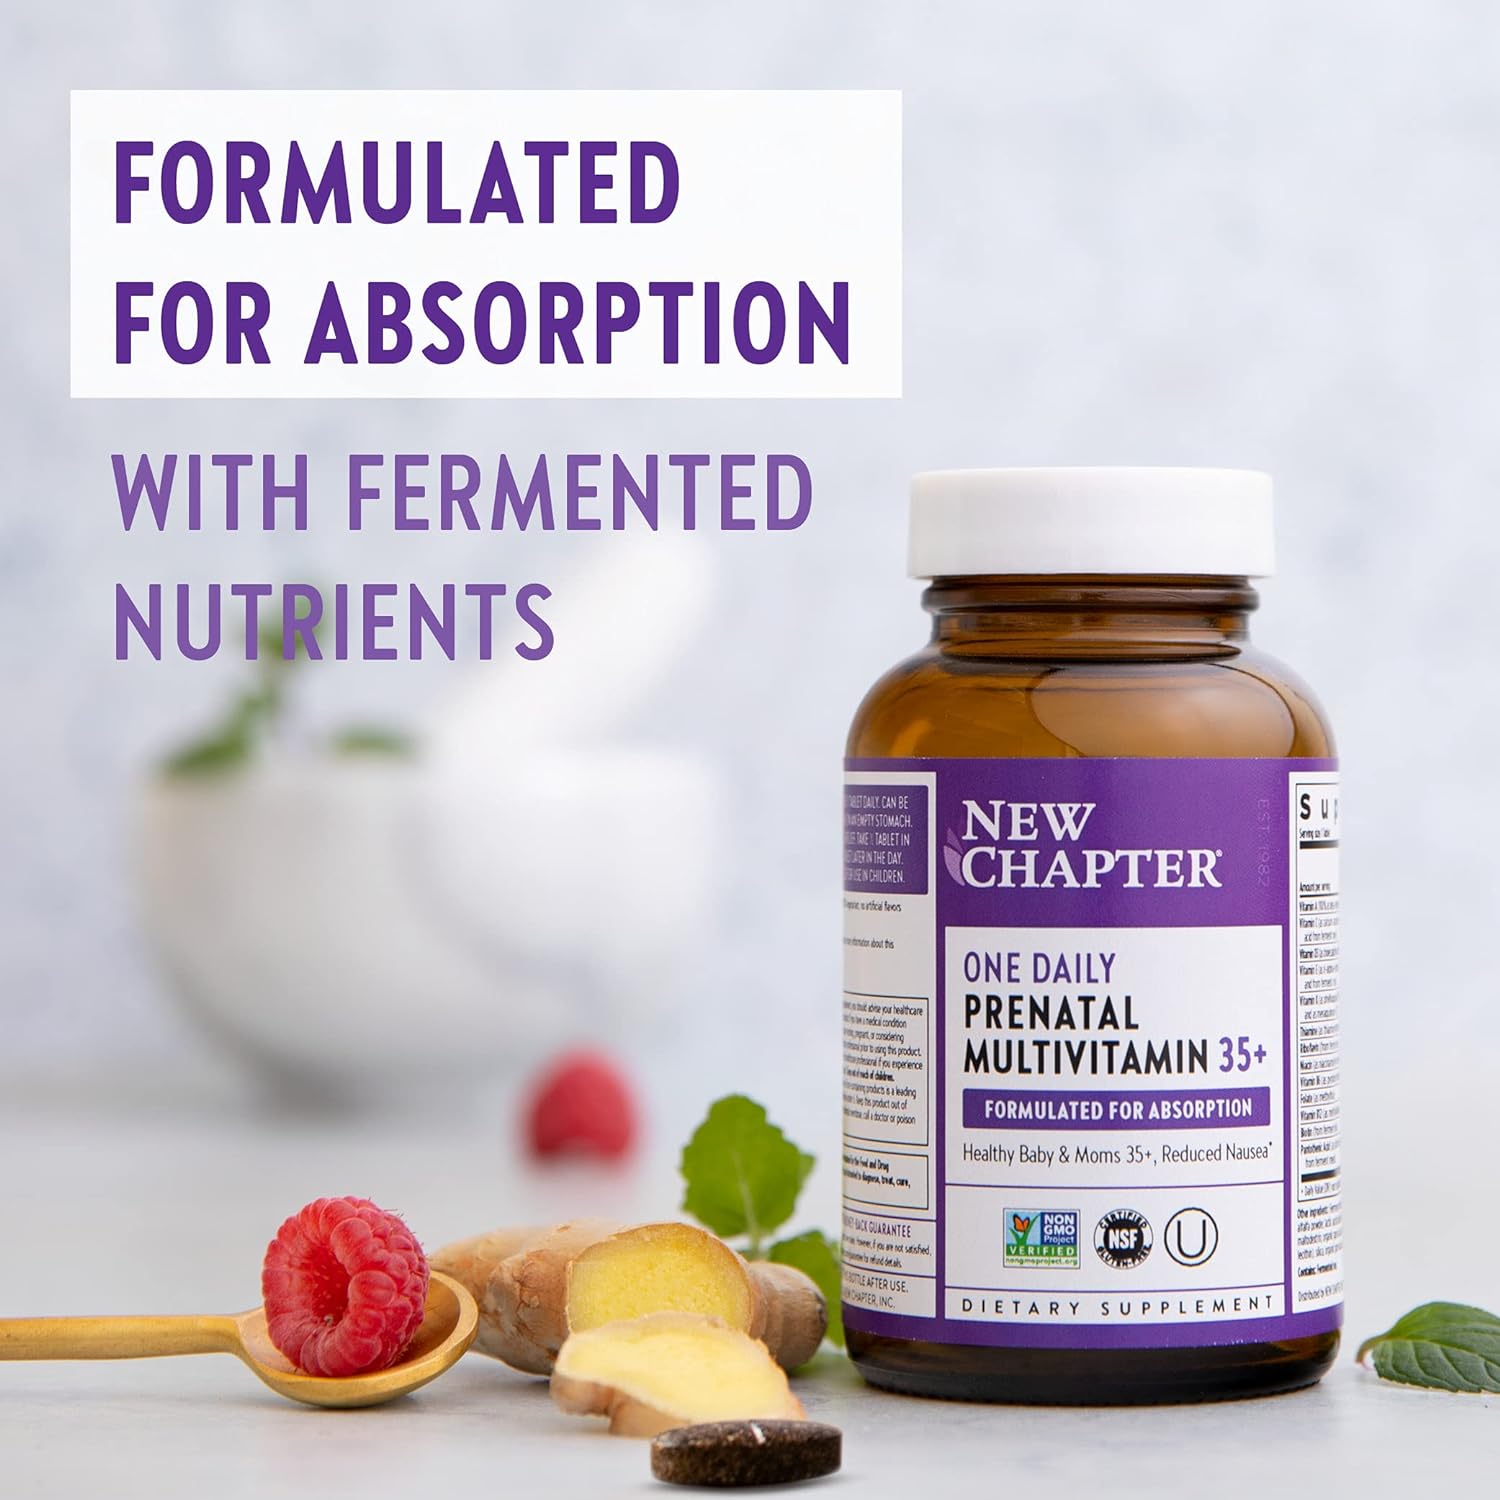 New Chapter Prenatal Vitamins, One Daily Prenatal Multivitamin Enhanced for Age 35+ with Methylfolate + Choline for Healthy Mom  Baby, Gluten Free  Non-GMO- 30 ct